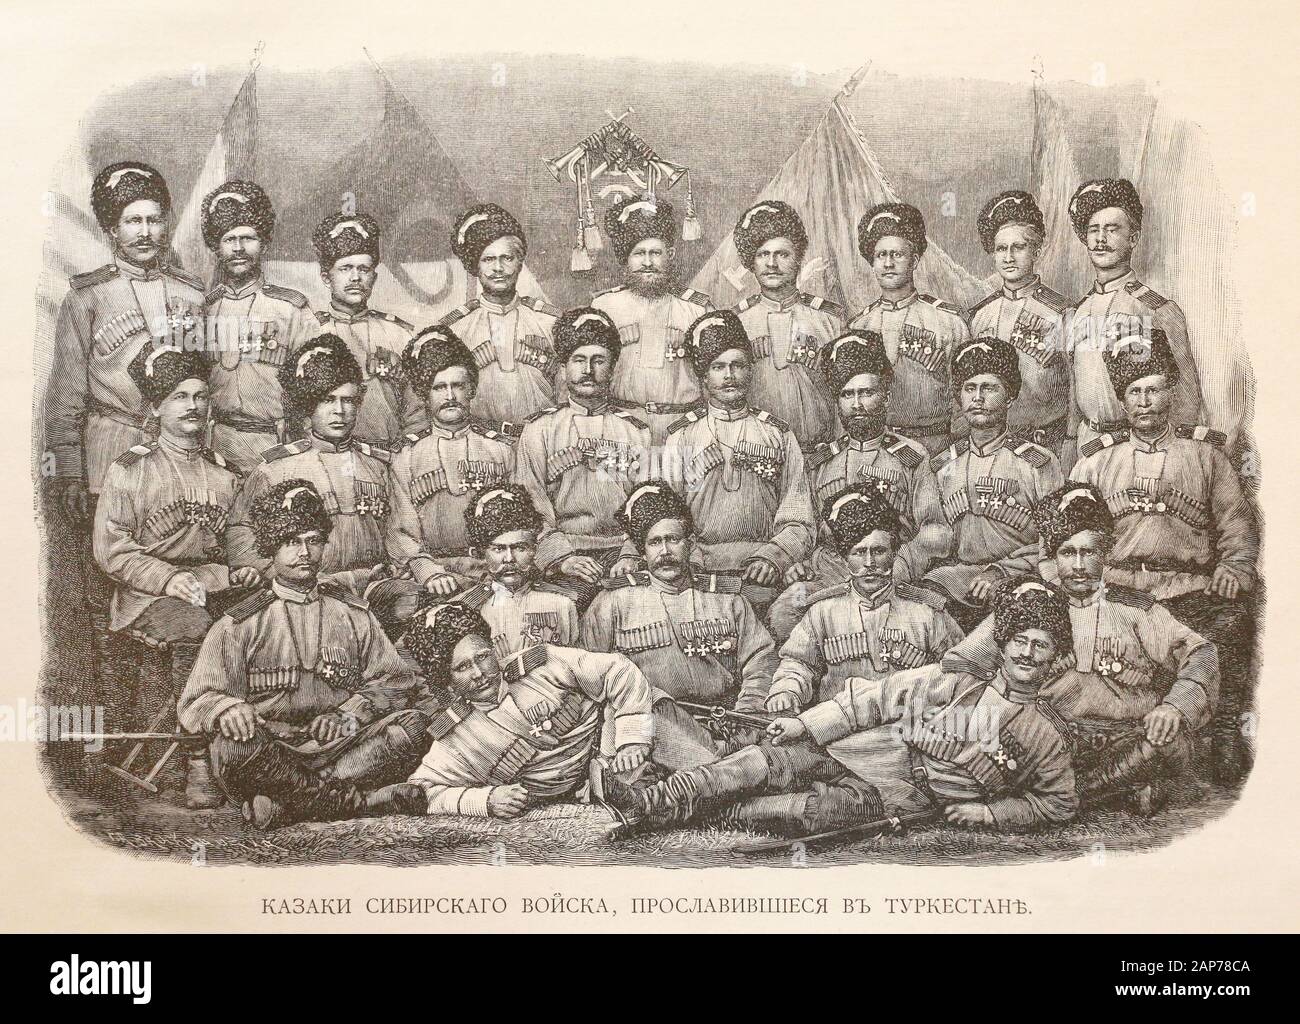 Cossacks of the Siberian army who became famous in Turkestan. Engraving of the 19th century. Stock Photo